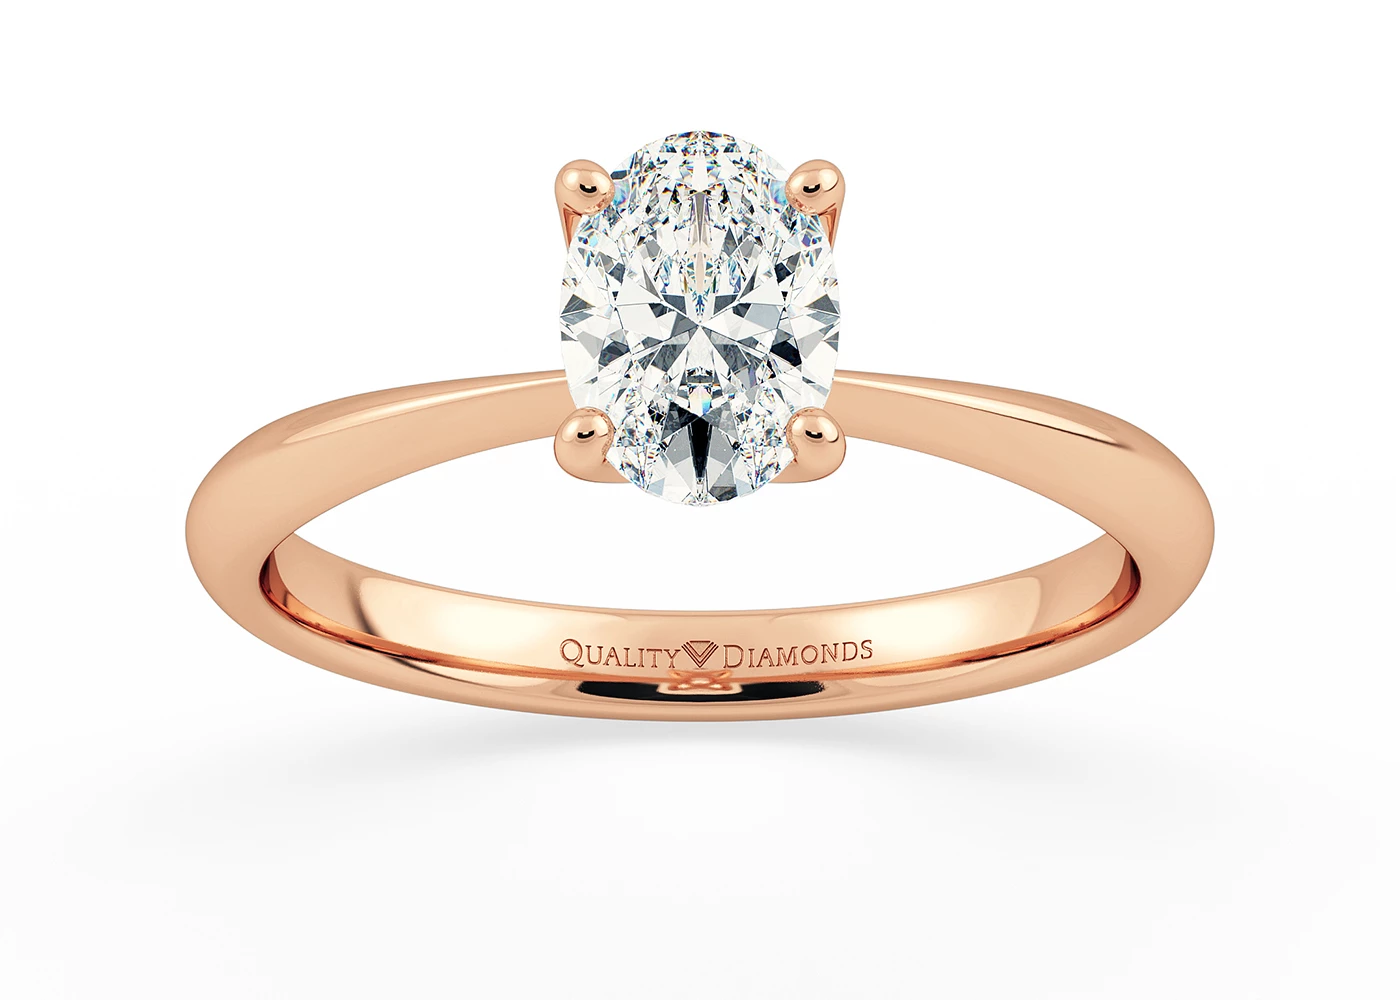 One Carat Oval Solitaire Diamond Engagement Ring in 18K Rose Gold